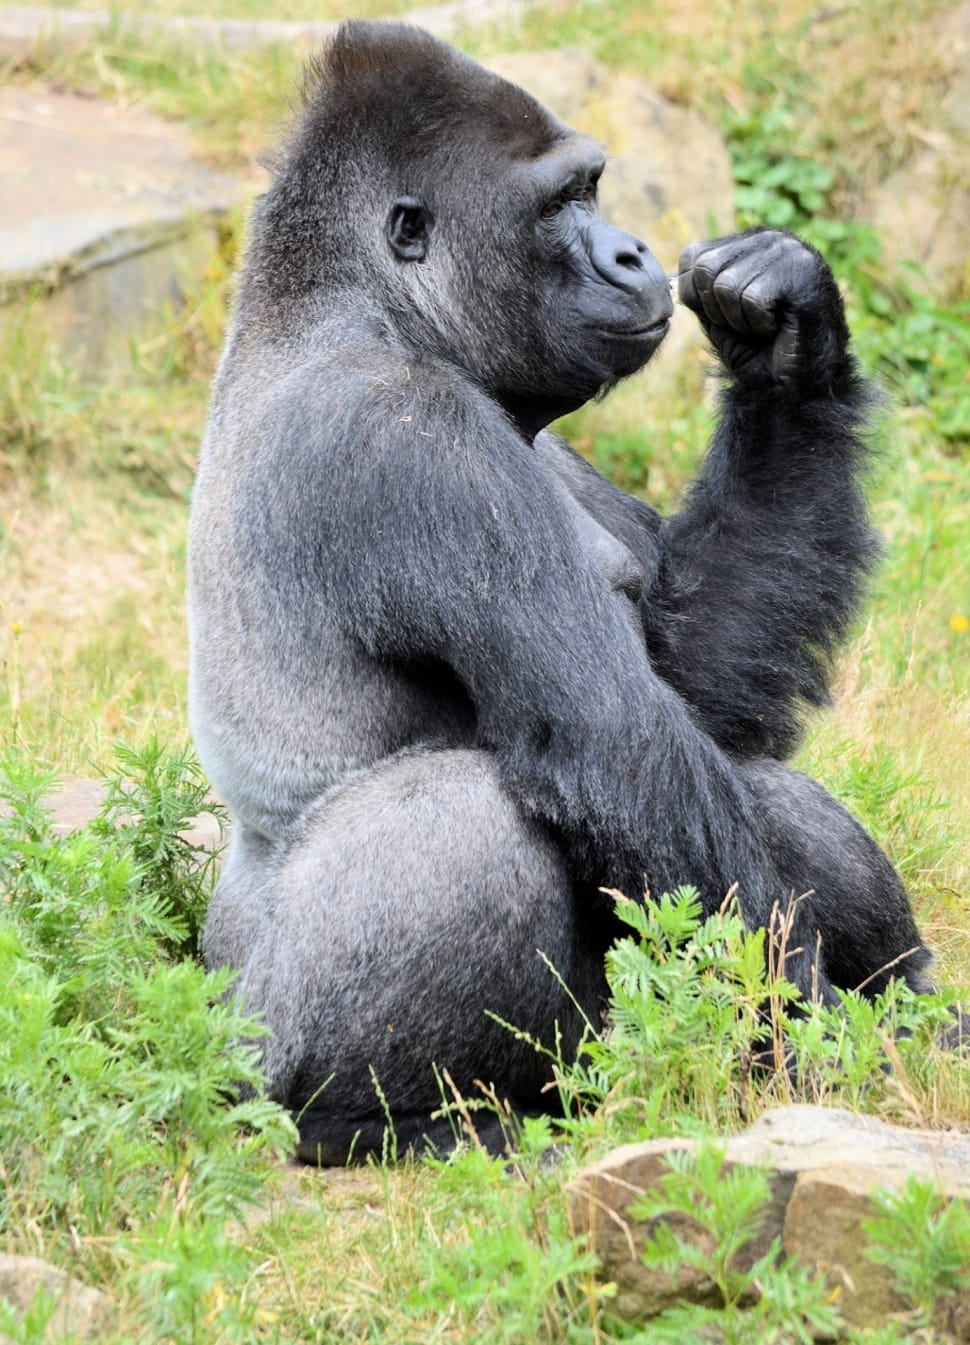 silver back Gorilla sitting on grass field near stone during daytime preview